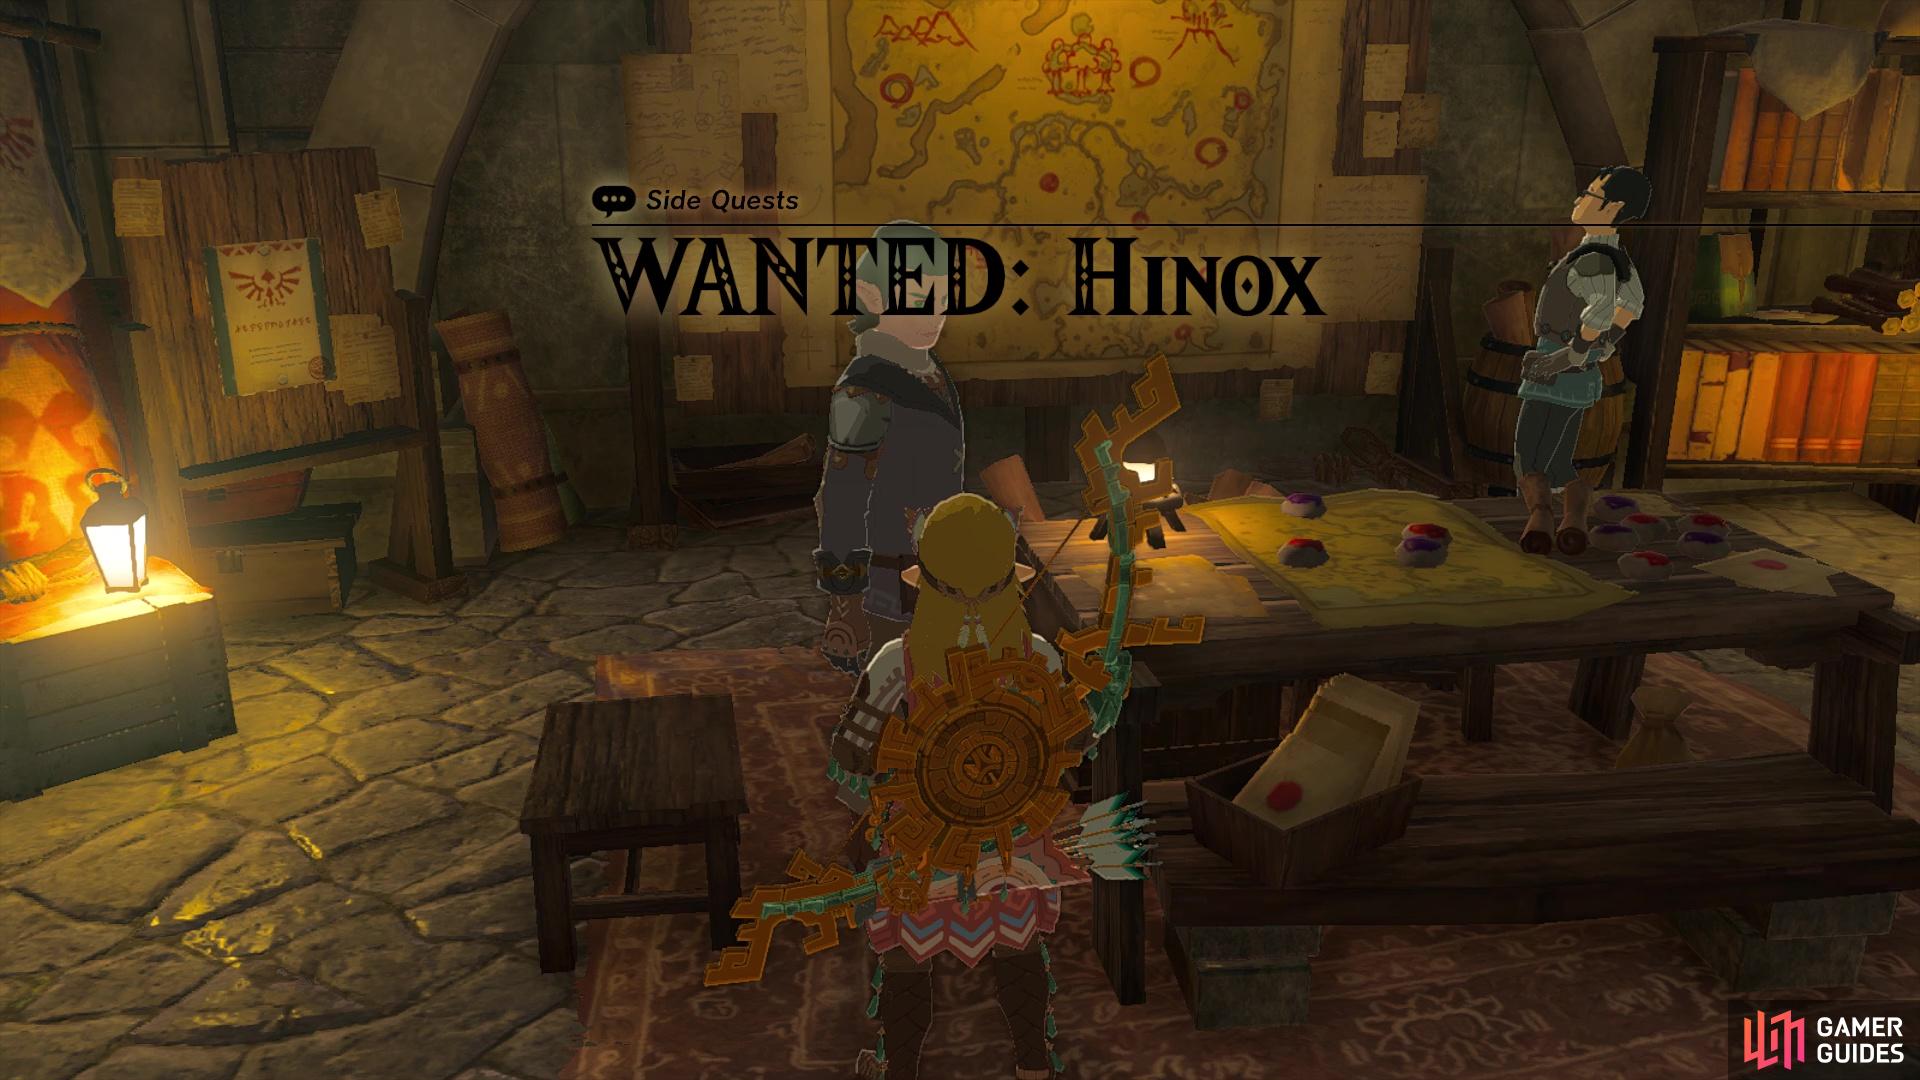 Wanted: Hinox is one of three monster elimination side quests from Gralens.